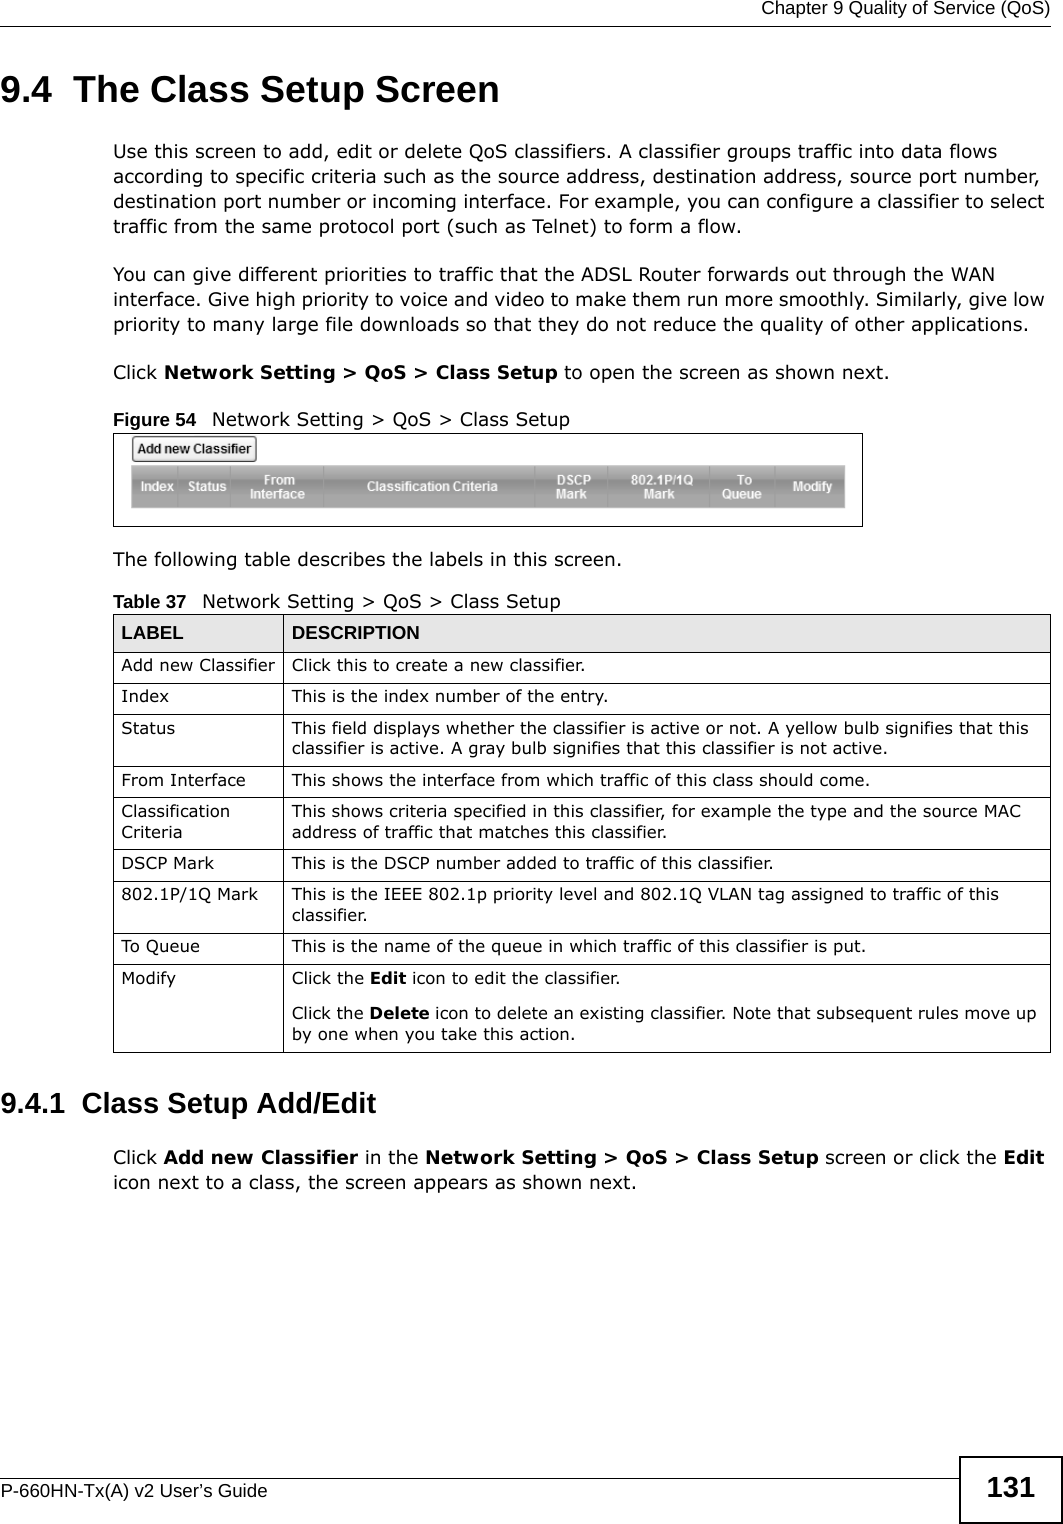  Chapter 9 Quality of Service (QoS)P-660HN-Tx(A) v2 User’s Guide 1319.4  The Class Setup Screen Use this screen to add, edit or delete QoS classifiers. A classifier groups traffic into data flows according to specific criteria such as the source address, destination address, source port number, destination port number or incoming interface. For example, you can configure a classifier to select traffic from the same protocol port (such as Telnet) to form a flow.You can give different priorities to traffic that the ADSL Router forwards out through the WAN interface. Give high priority to voice and video to make them run more smoothly. Similarly, give low priority to many large file downloads so that they do not reduce the quality of other applications. Click Network Setting &gt; QoS &gt; Class Setup to open the screen as shown next.Figure 54   Network Setting &gt; QoS &gt; Class SetupThe following table describes the labels in this screen. 9.4.1  Class Setup Add/EditClick Add new Classifier in the Network Setting &gt; QoS &gt; Class Setup screen or click the Edit icon next to a class, the screen appears as shown next.Table 37   Network Setting &gt; QoS &gt; Class SetupLABEL DESCRIPTIONAdd new Classifier Click this to create a new classifier.Index This is the index number of the entry.Status This field displays whether the classifier is active or not. A yellow bulb signifies that this classifier is active. A gray bulb signifies that this classifier is not active.From Interface This shows the interface from which traffic of this class should come.Classification CriteriaThis shows criteria specified in this classifier, for example the type and the source MAC address of traffic that matches this classifier.DSCP Mark This is the DSCP number added to traffic of this classifier.802.1P/1Q Mark This is the IEEE 802.1p priority level and 802.1Q VLAN tag assigned to traffic of this classifier.To Queue This is the name of the queue in which traffic of this classifier is put.Modify Click the Edit icon to edit the classifier.Click the Delete icon to delete an existing classifier. Note that subsequent rules move up by one when you take this action.